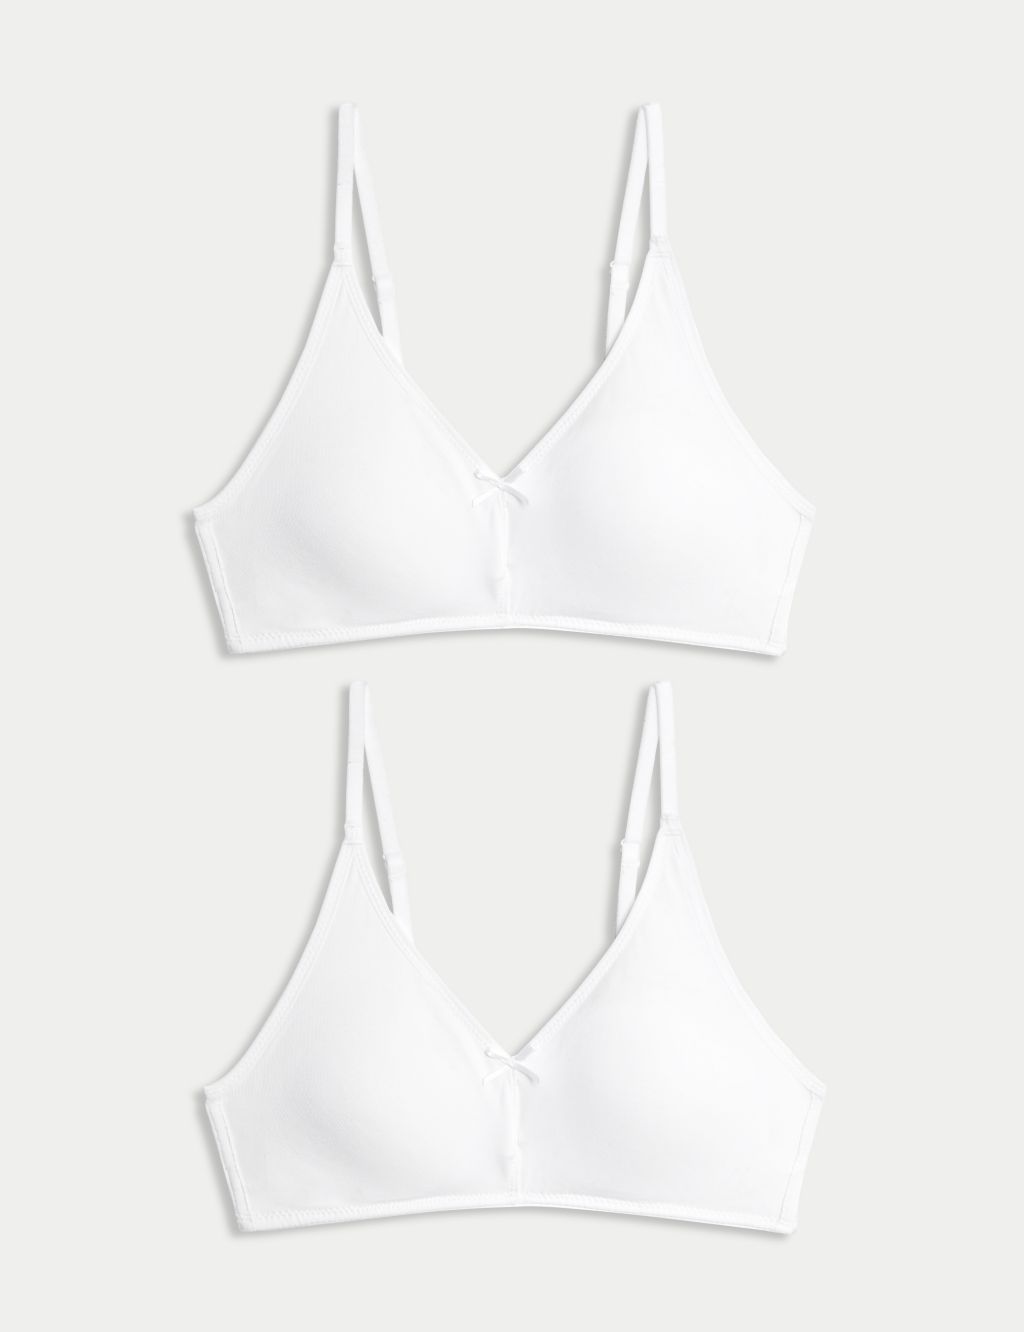 Junior All Cotton Training Starter Bras for Young and Little Girls -Stage  1A